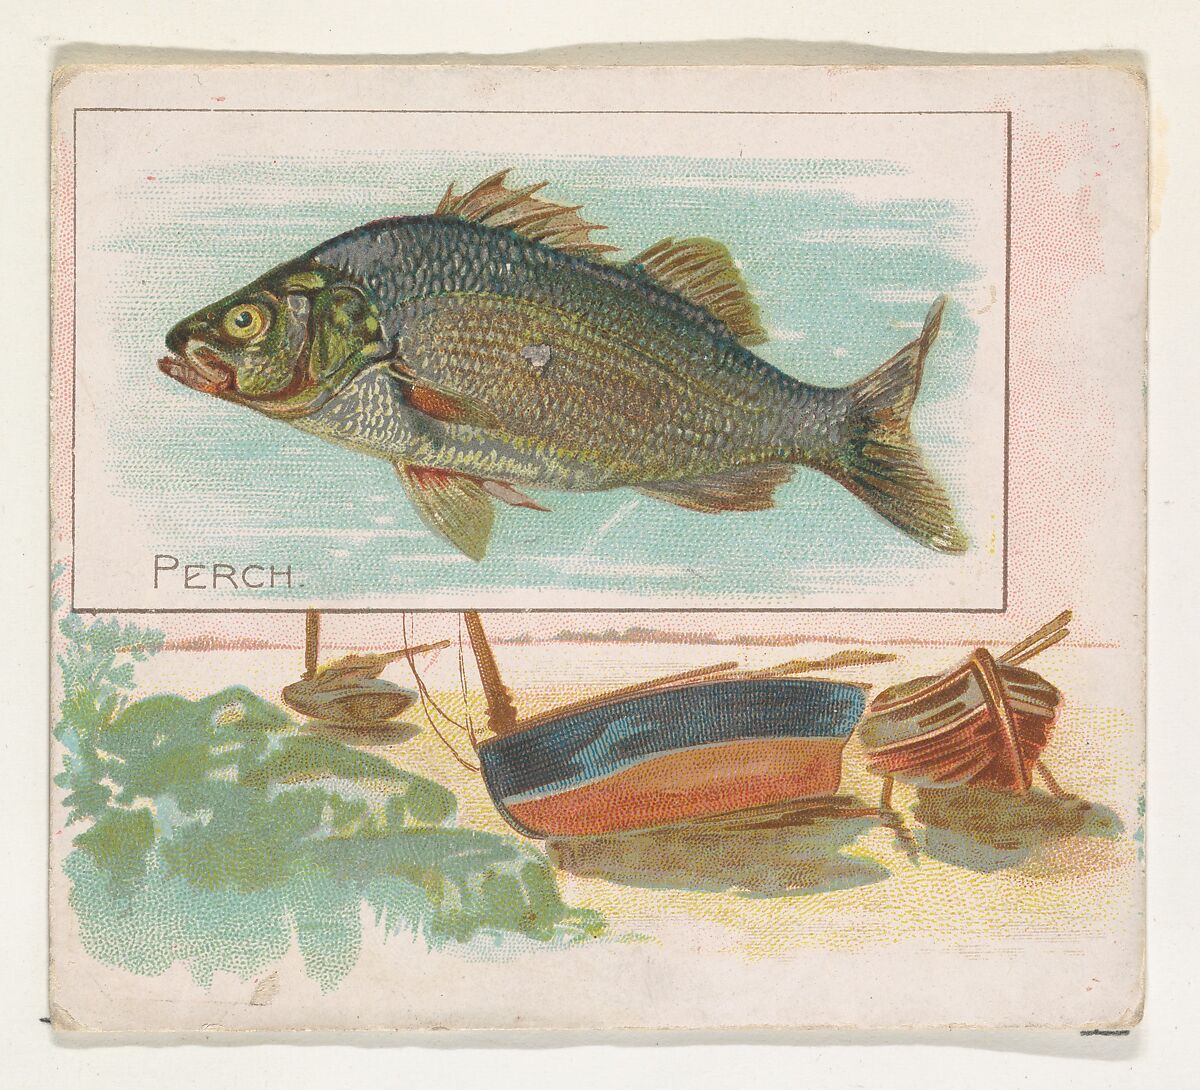 Perch, from Fish from American Waters series (N39) for Allen & Ginter Cigarettes, Issued by Allen &amp; Ginter (American, Richmond, Virginia), Commercial color lithograph 